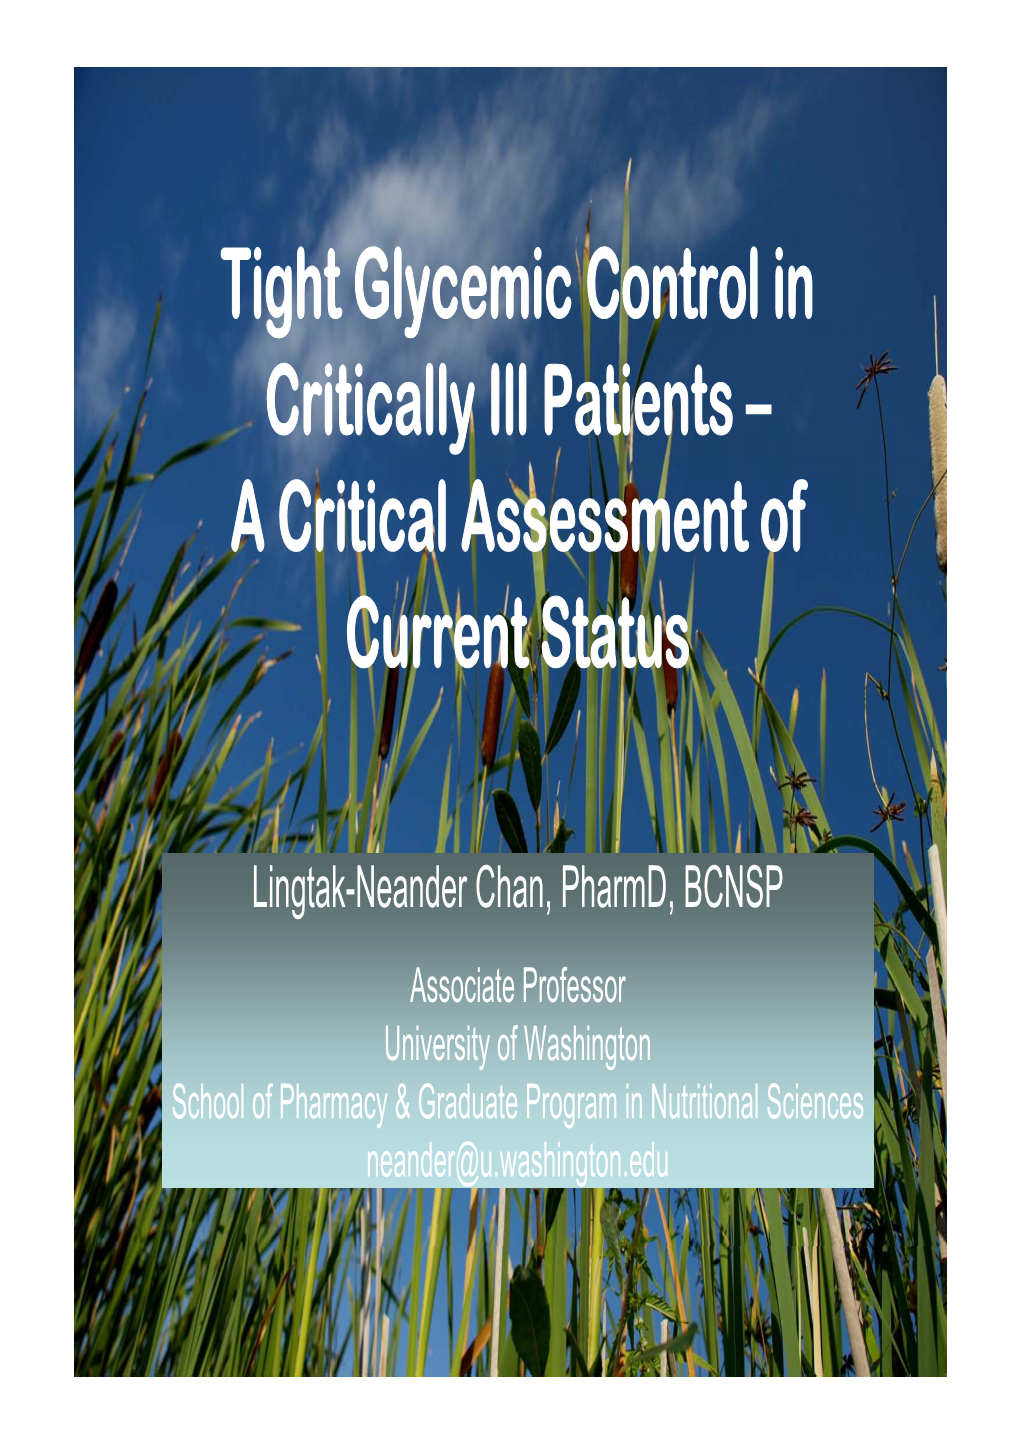 Tight Glycemic Control in Critically Ill Patients – a Critical Assessment of Current Status